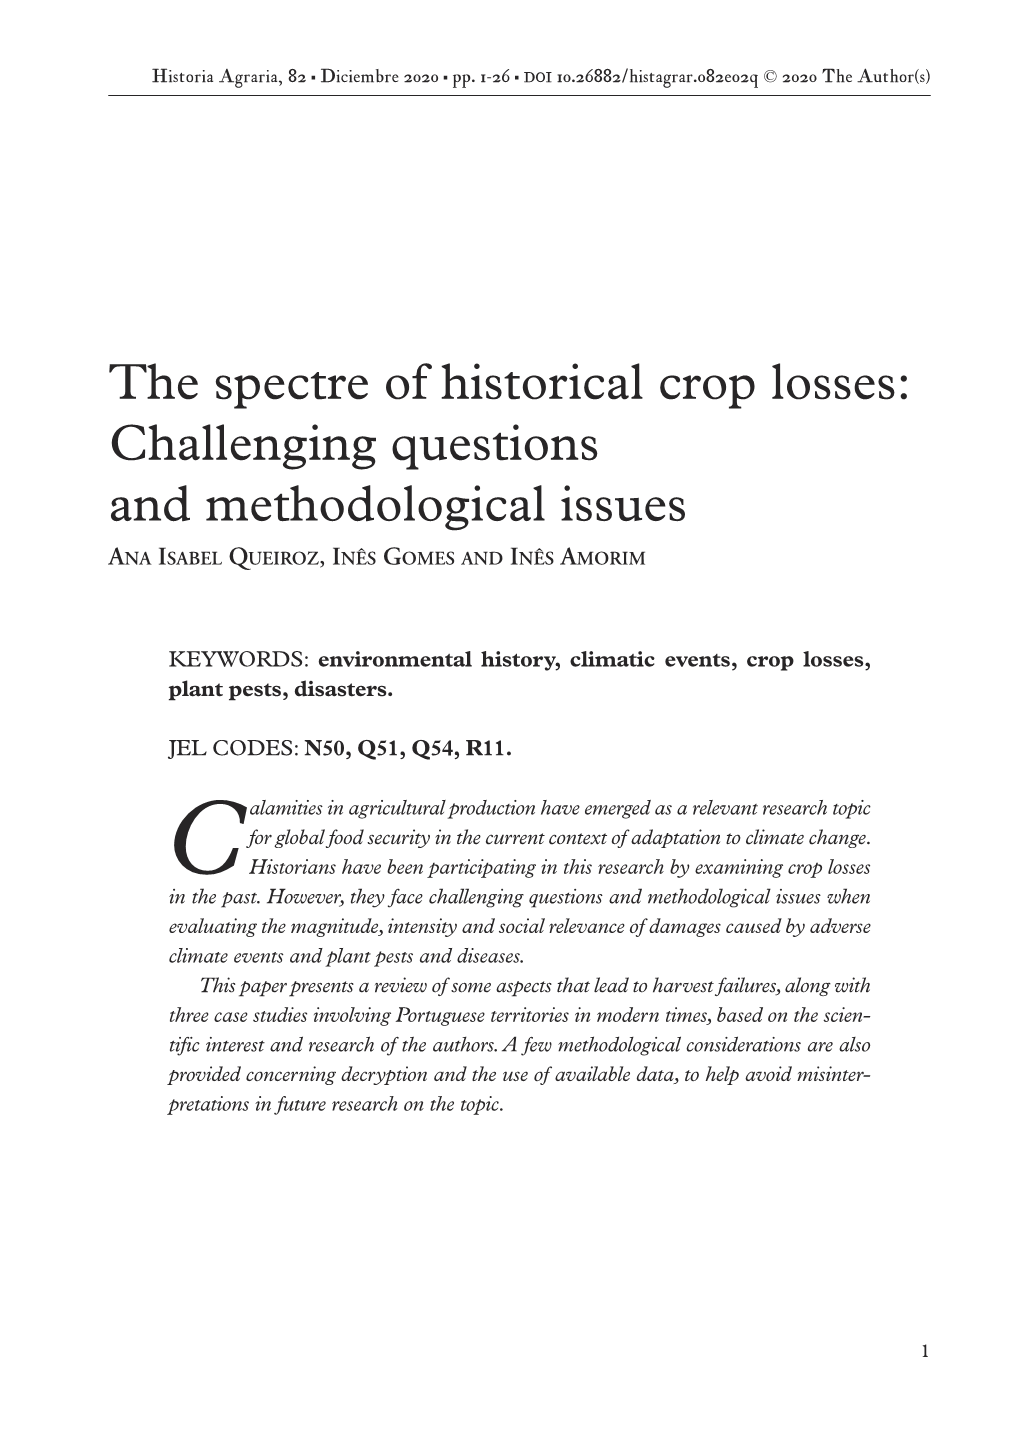 The Spectre of Historical Crop Losses: Challenging Questions and Methodological Issues ANA ISABEL QUEIROZ, INÊS GOMES and INÊS AMORIM